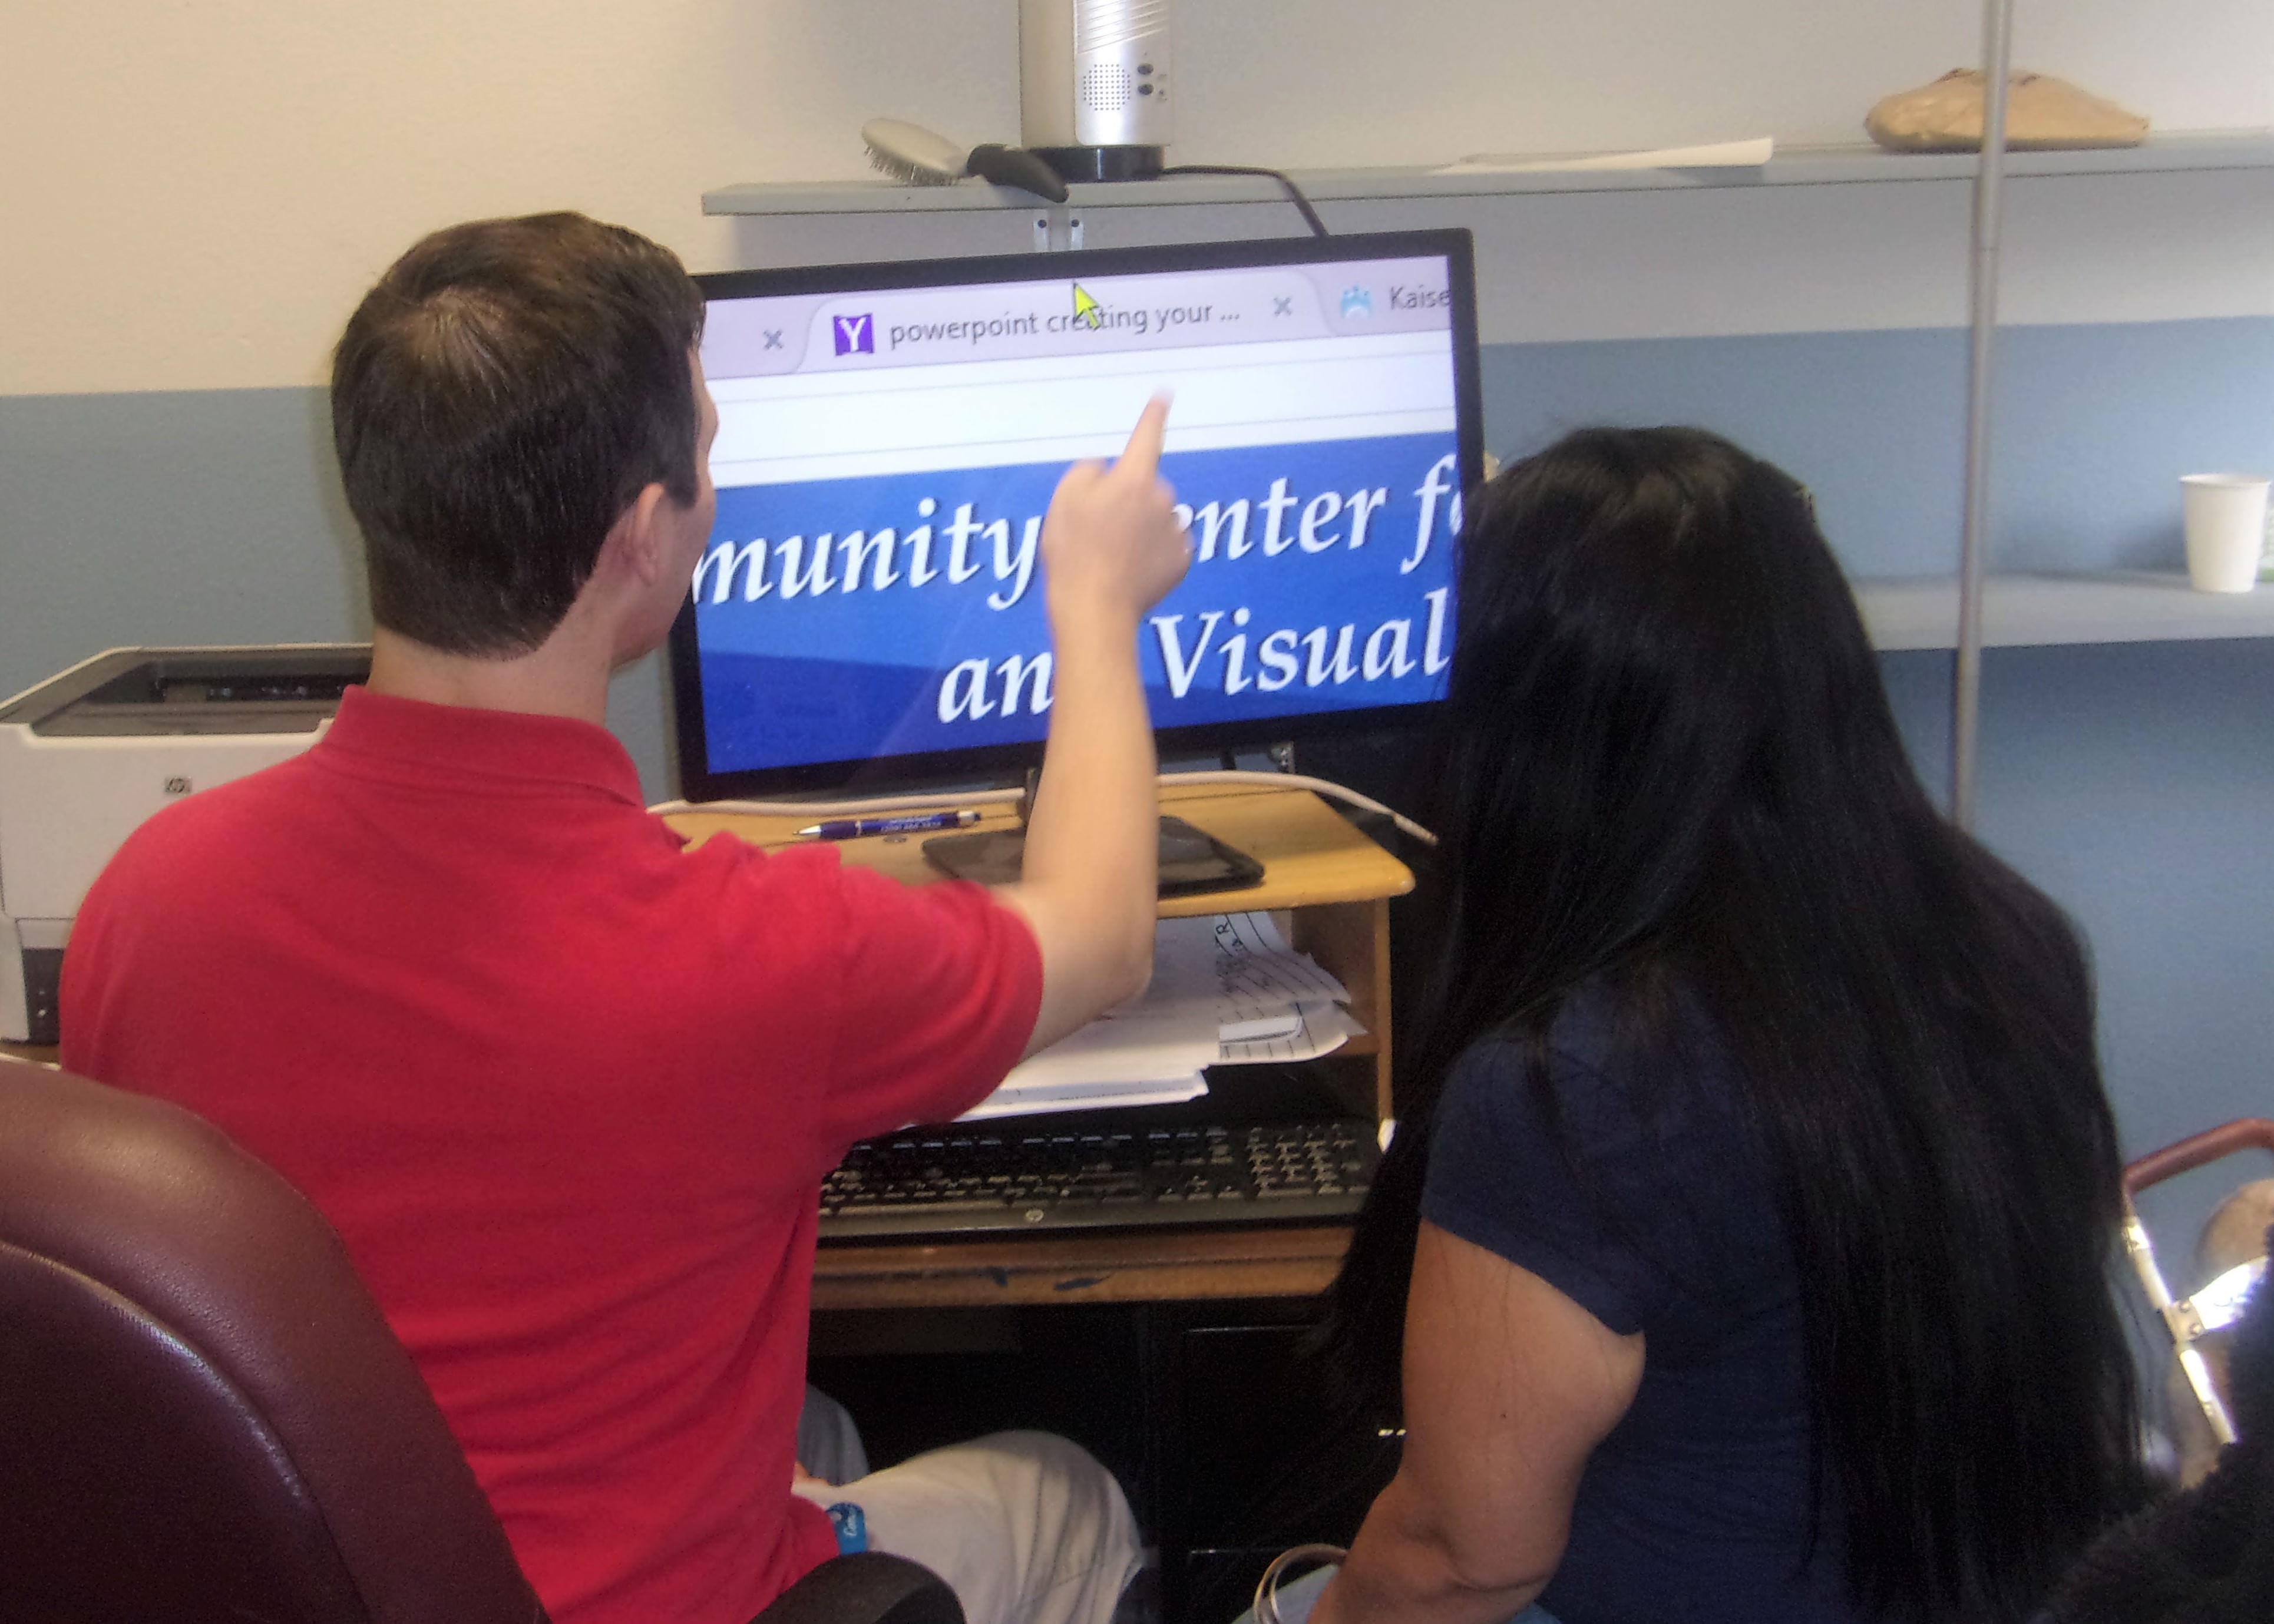 Assistive technology instructor demonstrates a computer using screen magnification software.